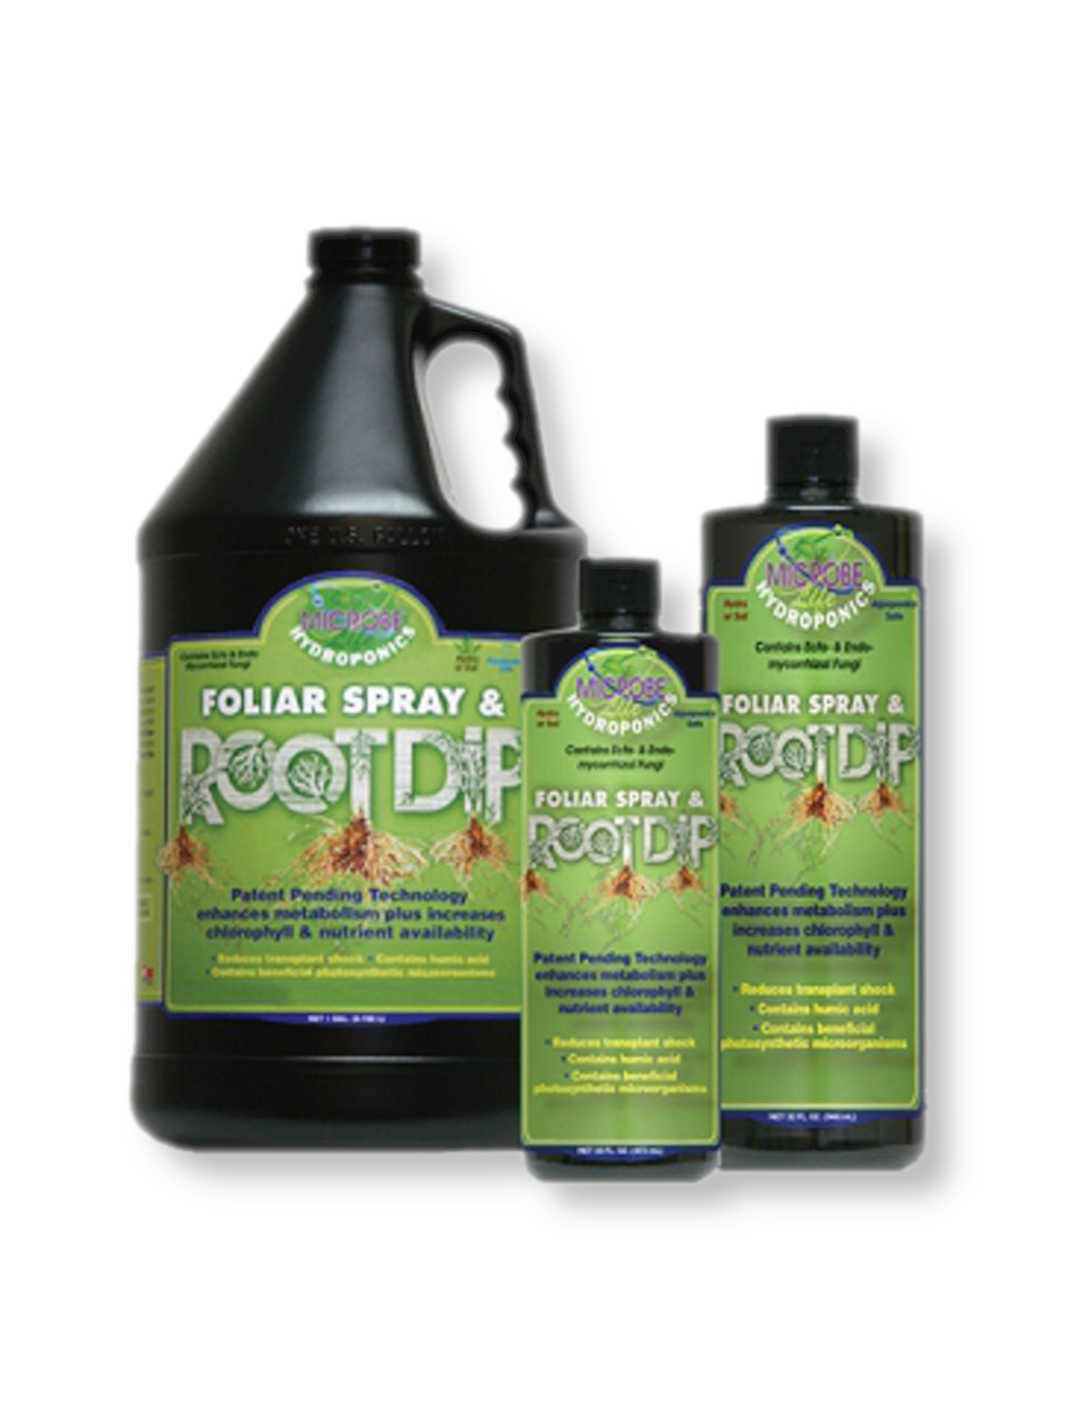 Foliar Spray and Root Dip from Microbe Life Hydroponics Sizes